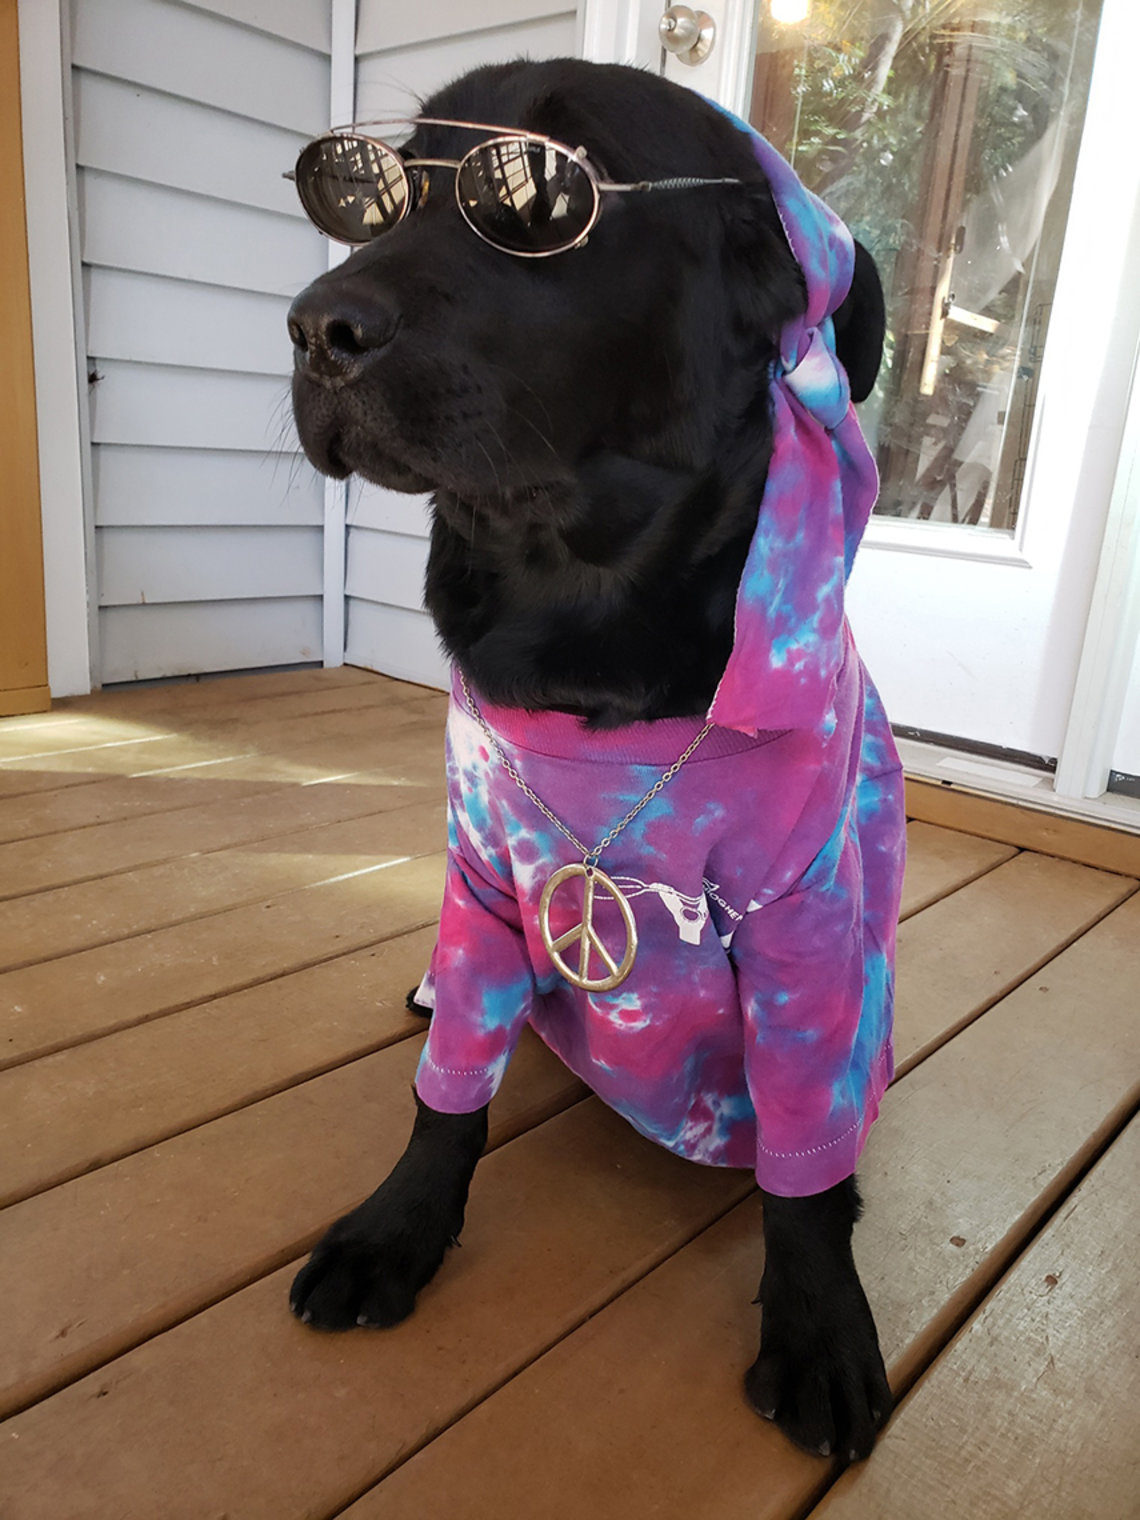 A black lab sports a tie-die shirt, peace-sign pendant and sunglasses.